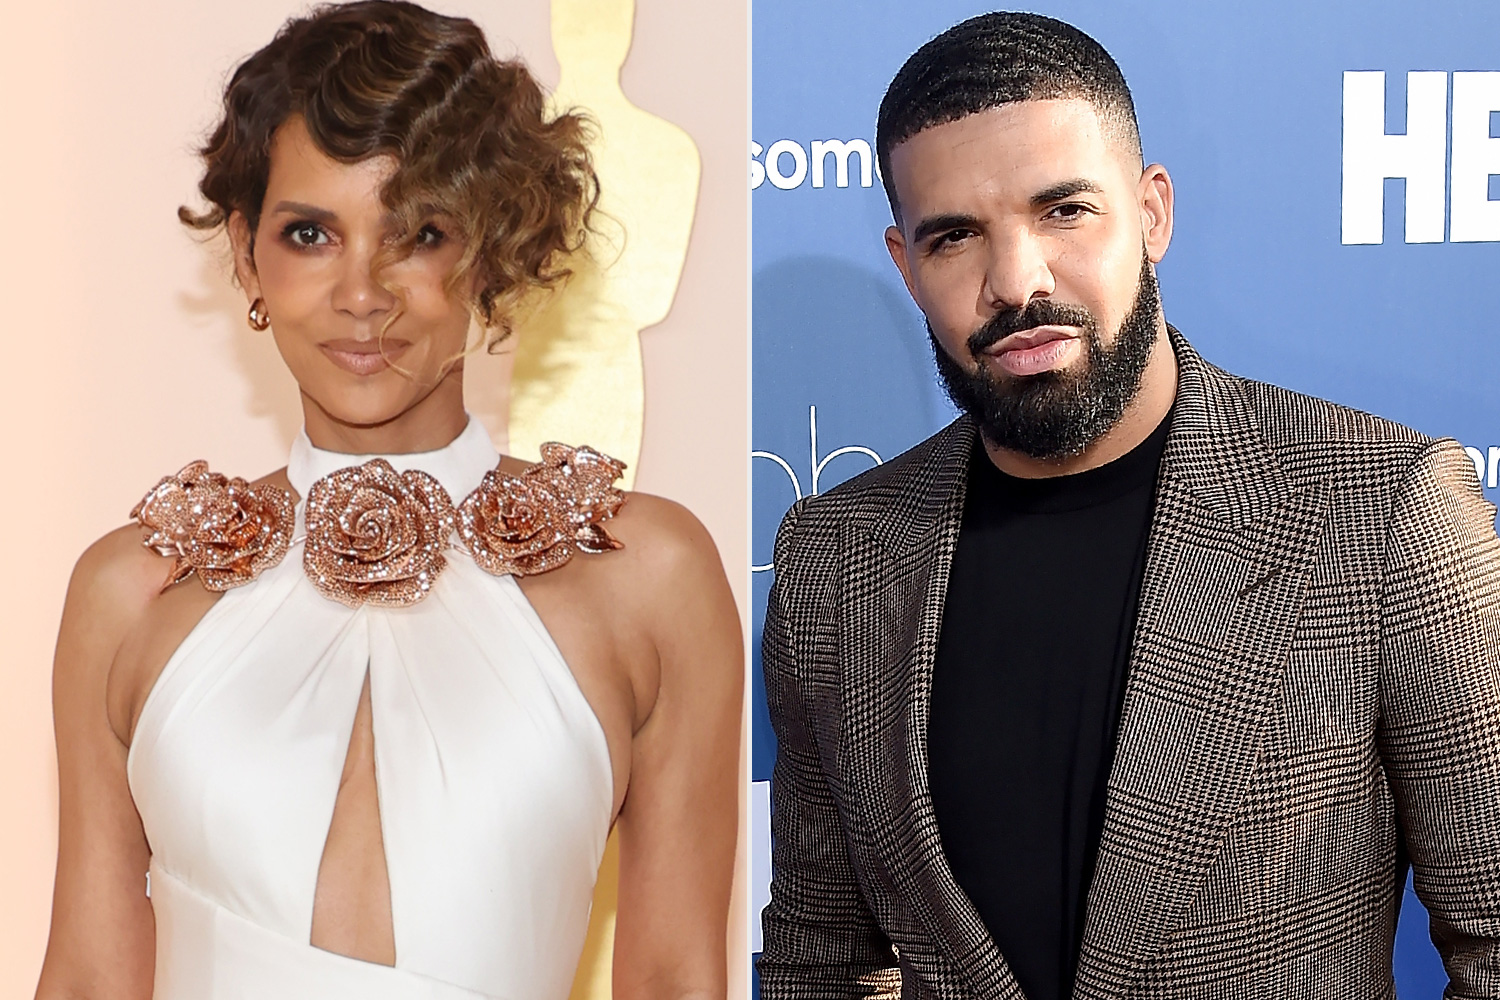 What happened between Halle Berry and Drake? What is the issue with Drake’s album cover?